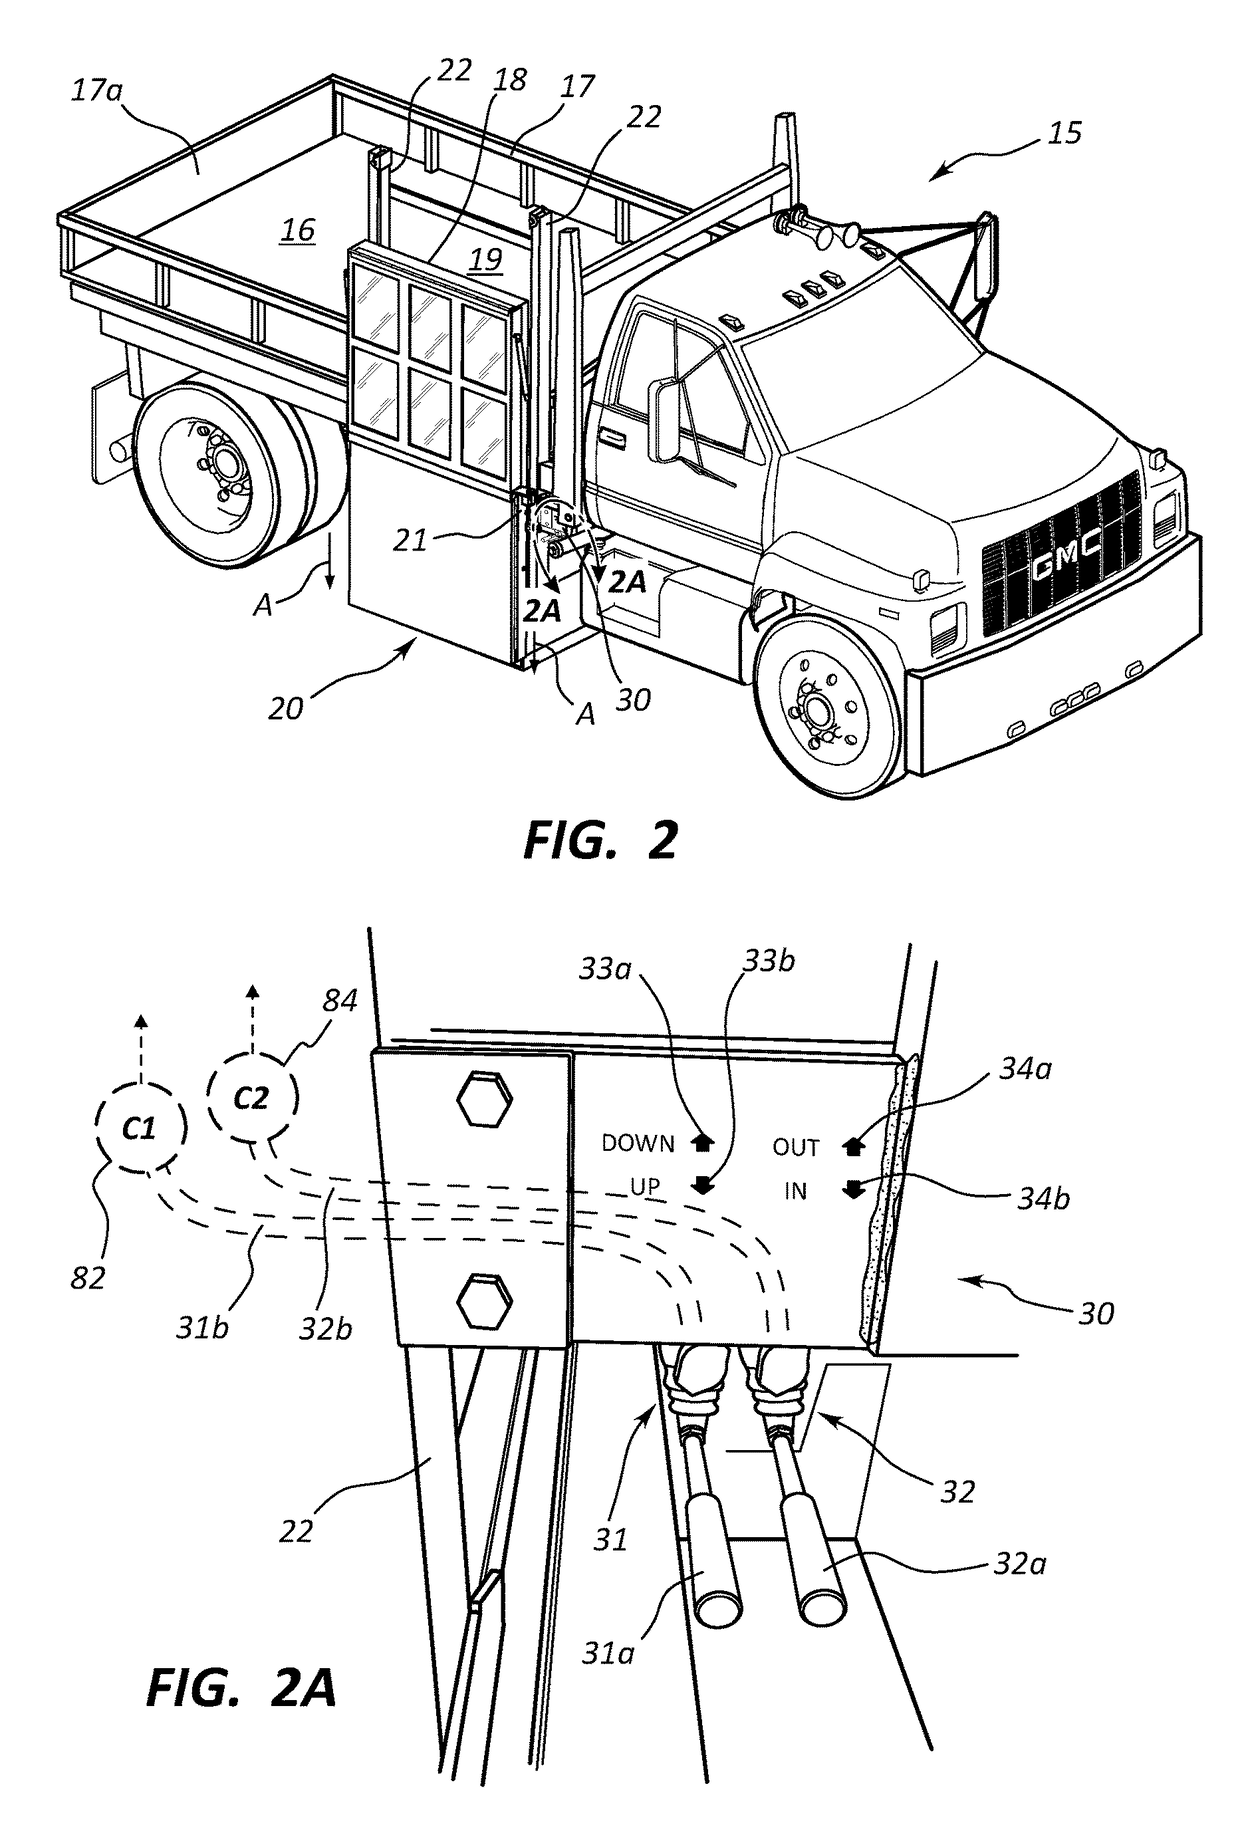 Portable private panel toilet system and method